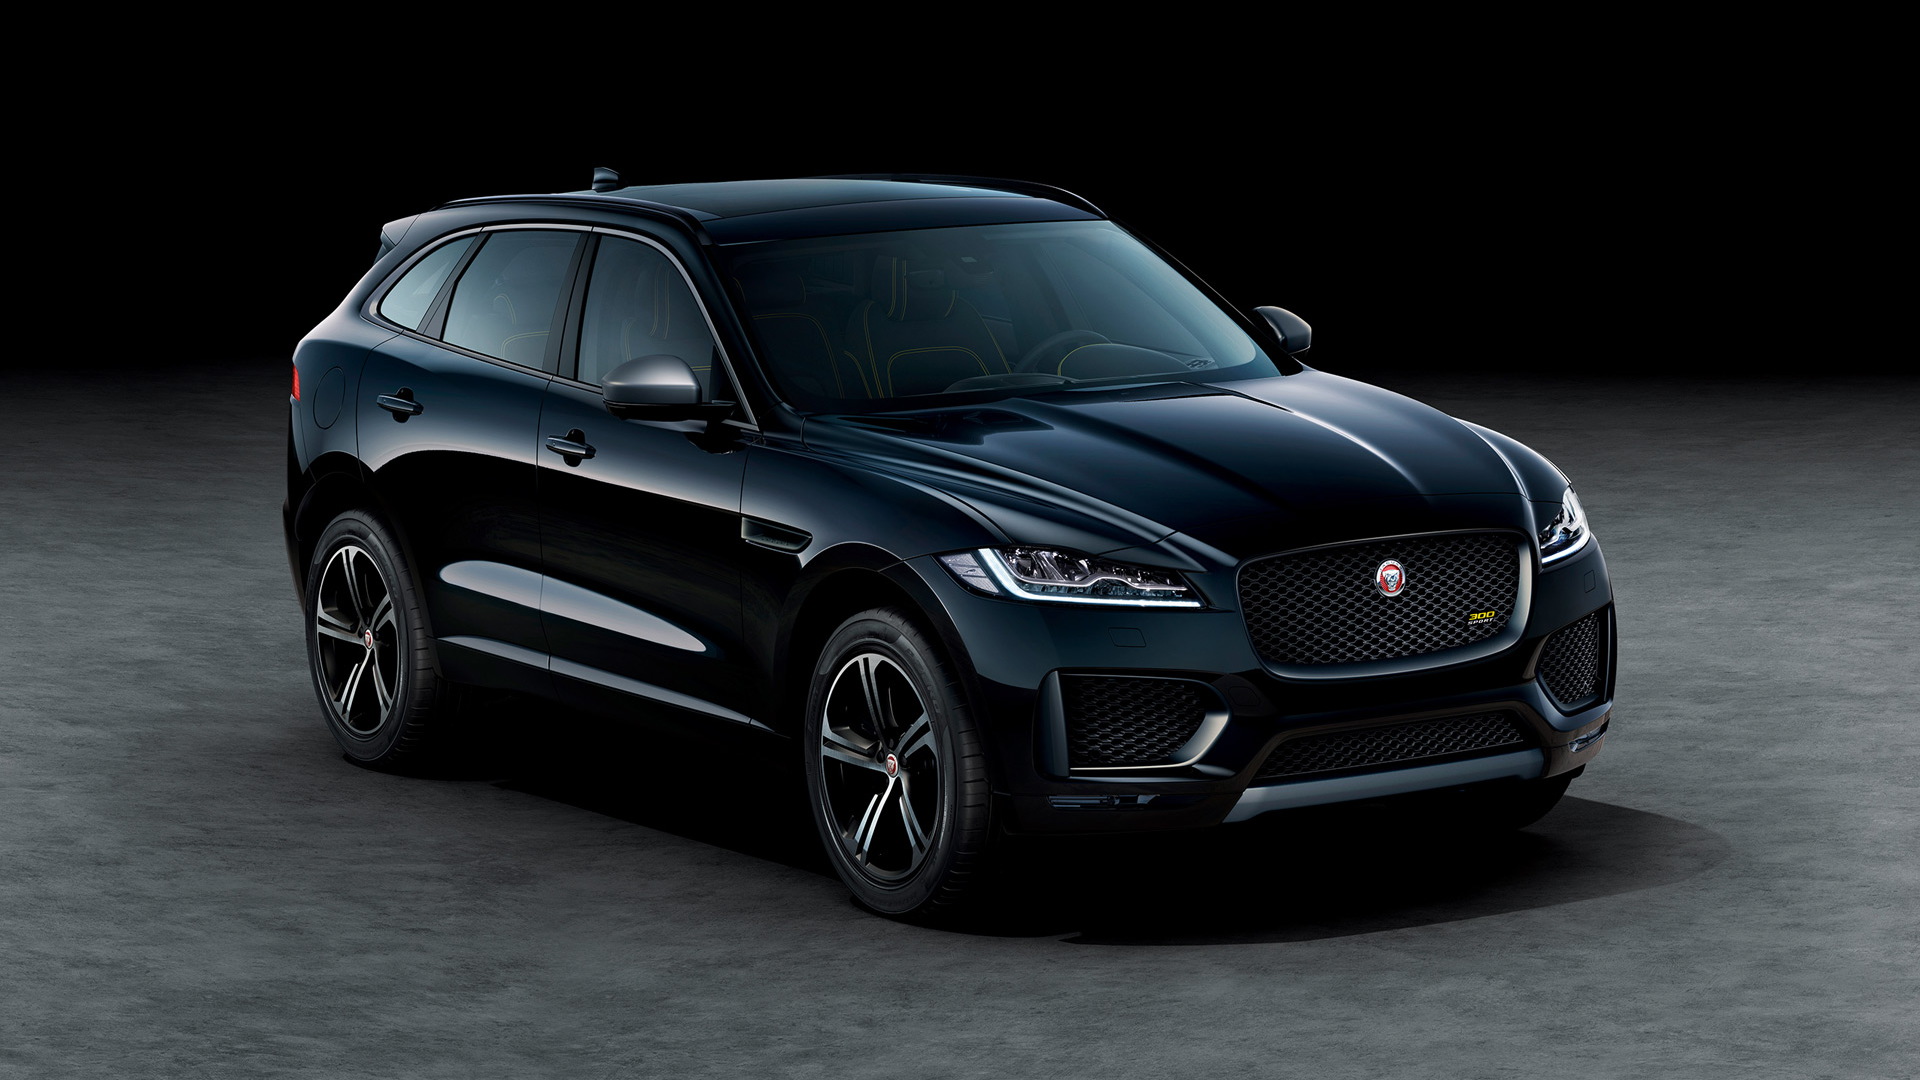 2020 Jaguar F-Pace lineup expands with two new arrivals